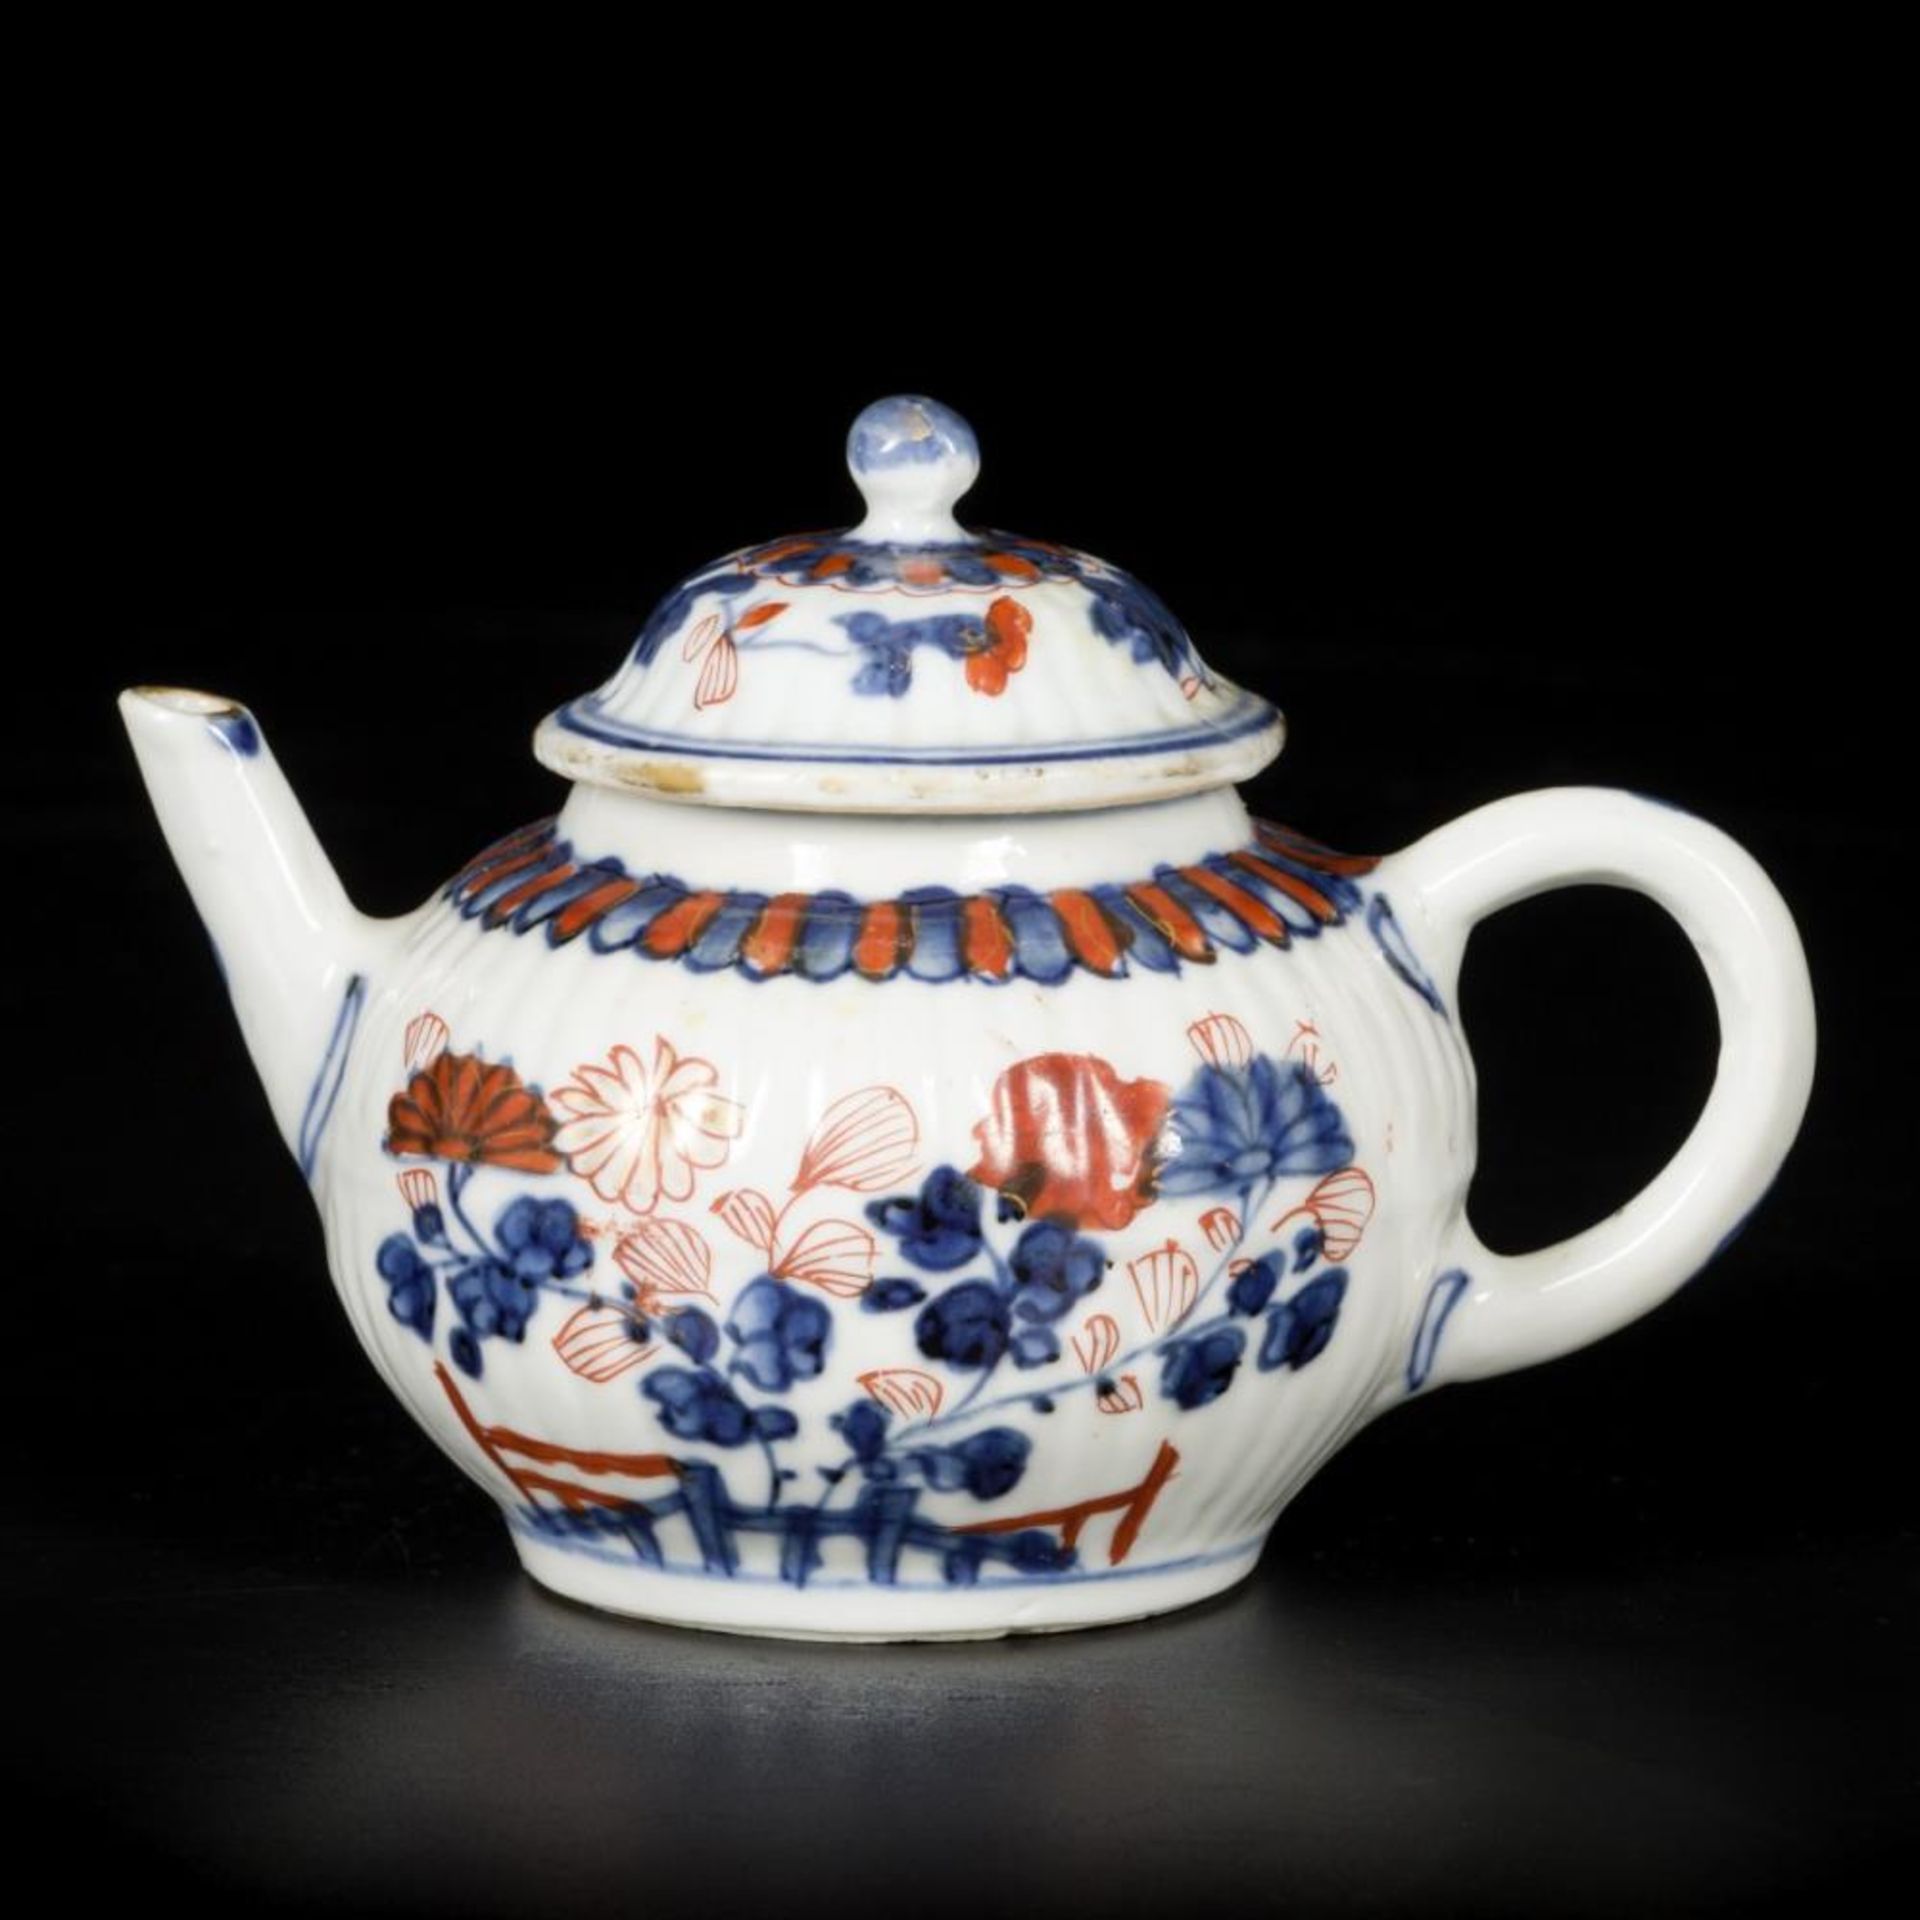 A porcelain Imari teapot with lid, China, 18th century. - Image 4 of 8